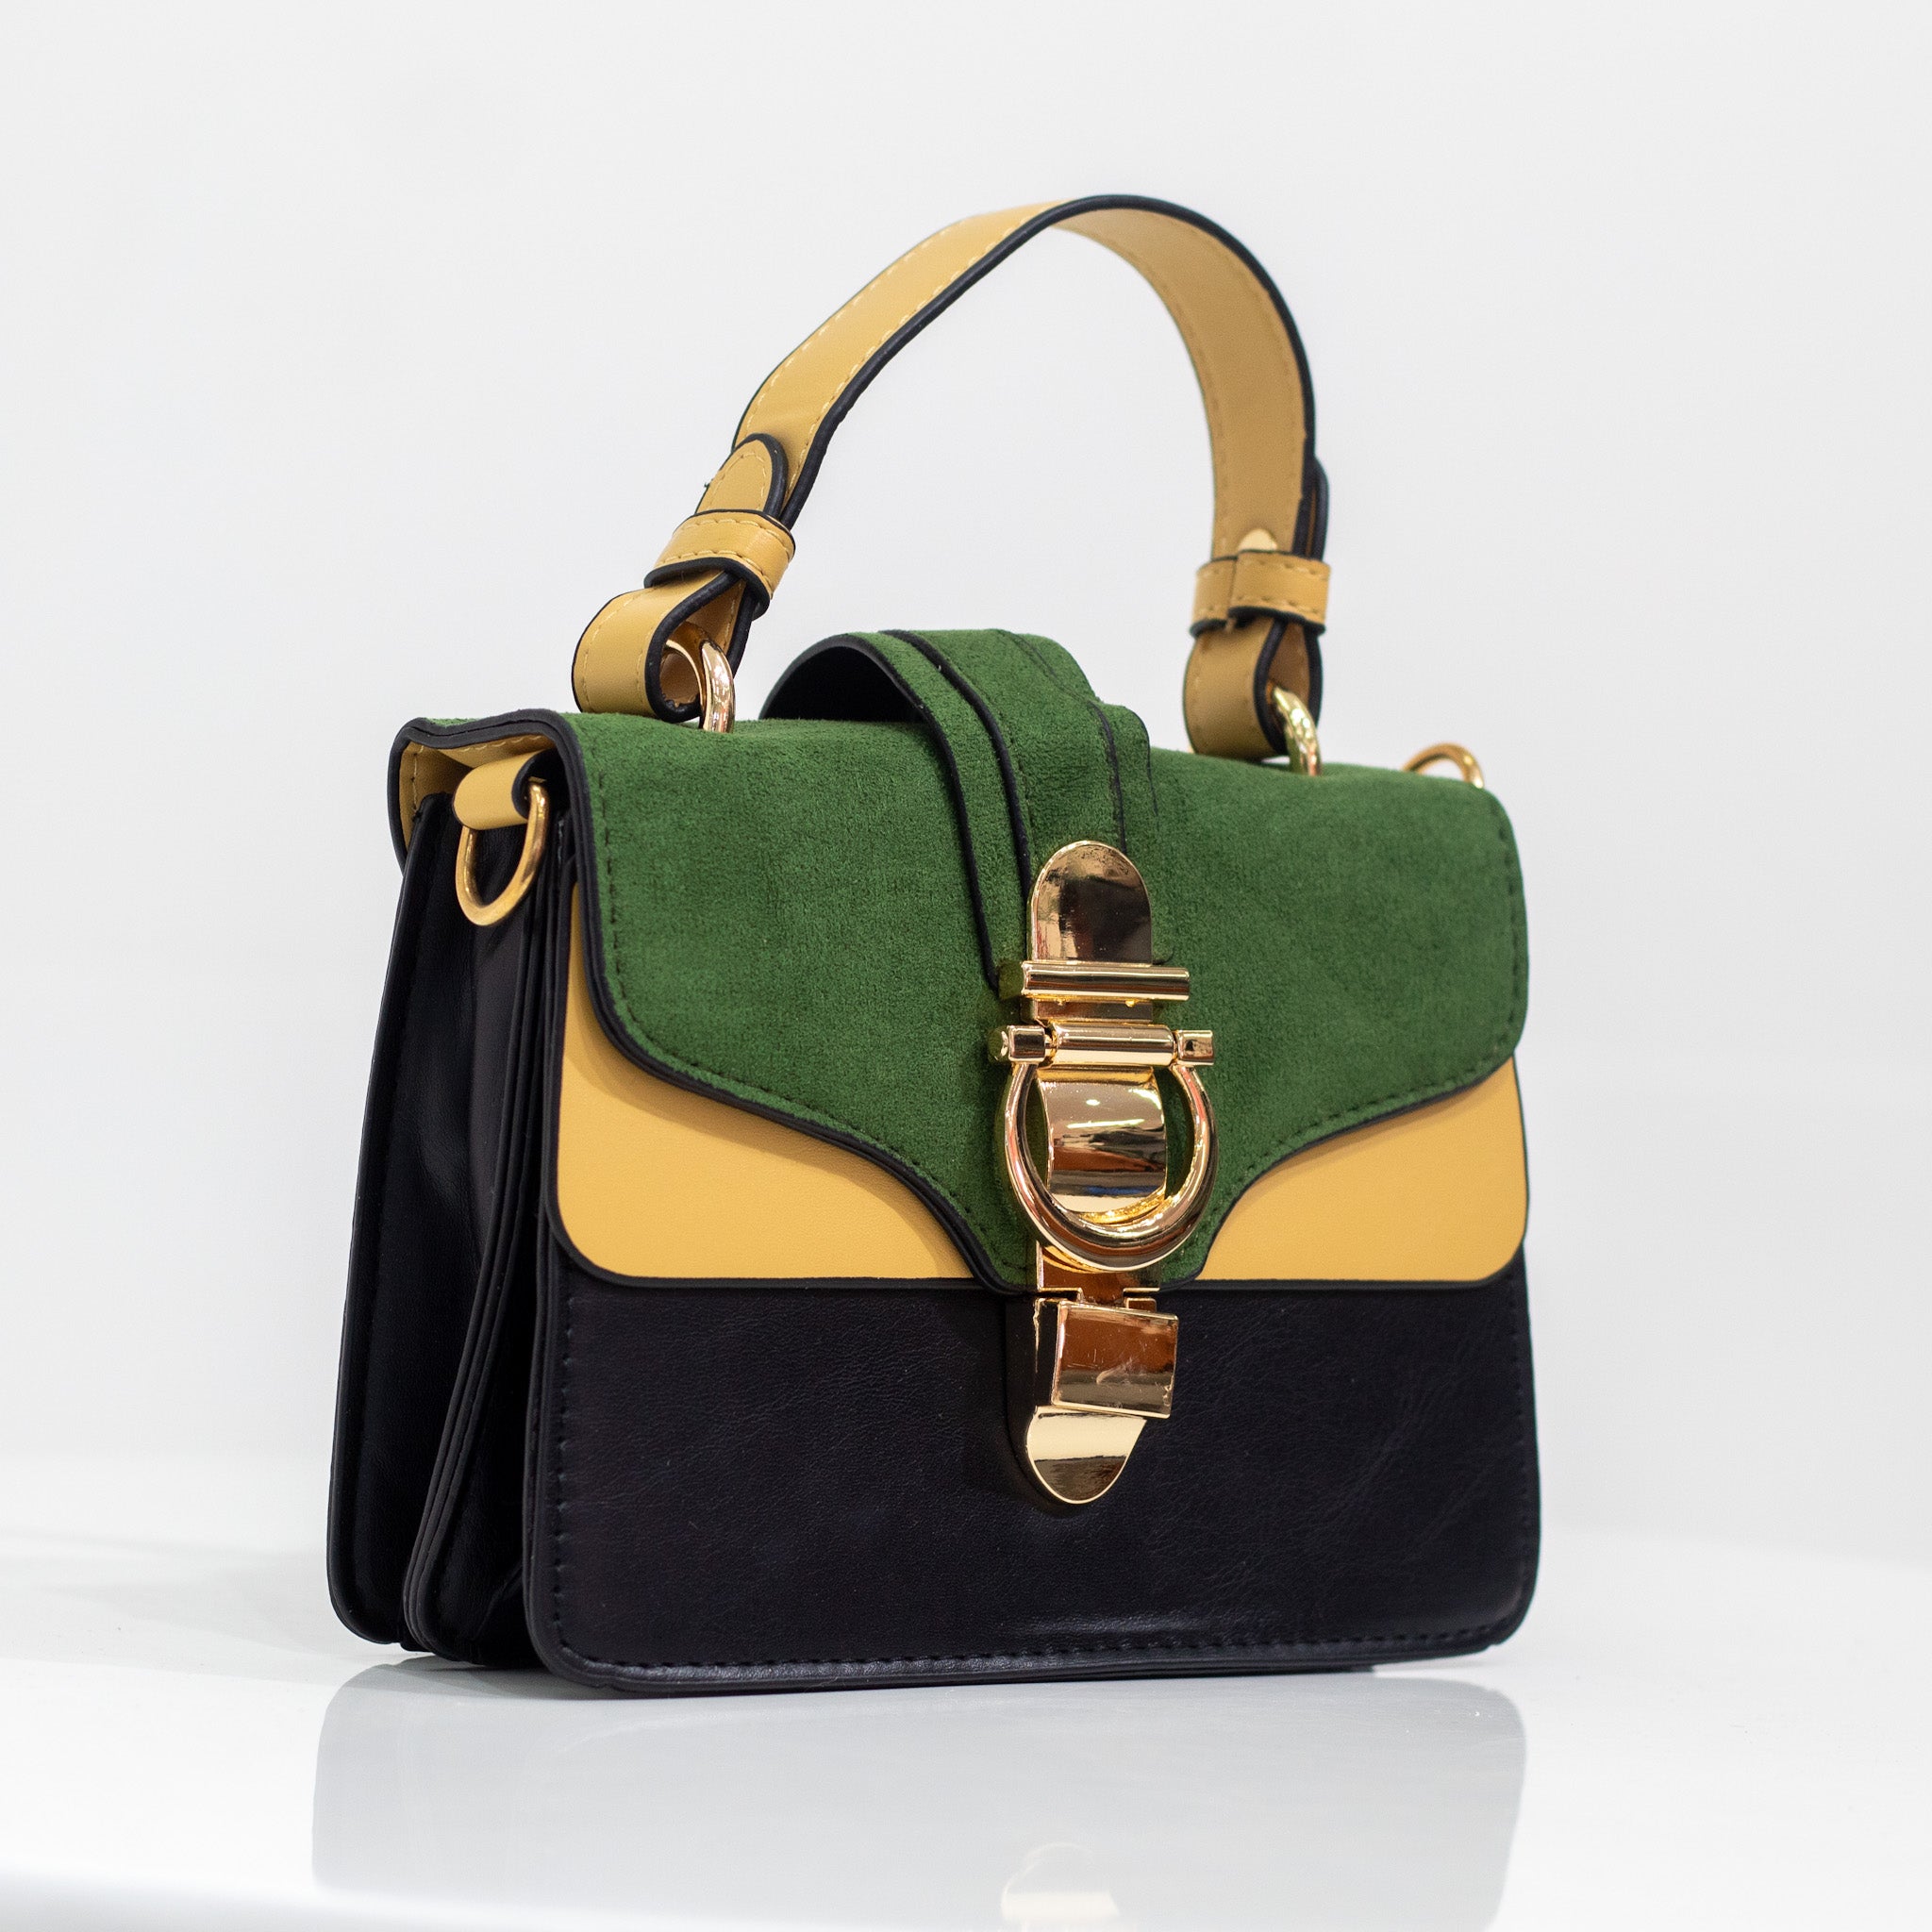 Yasti multi-color faux leather hand bag green